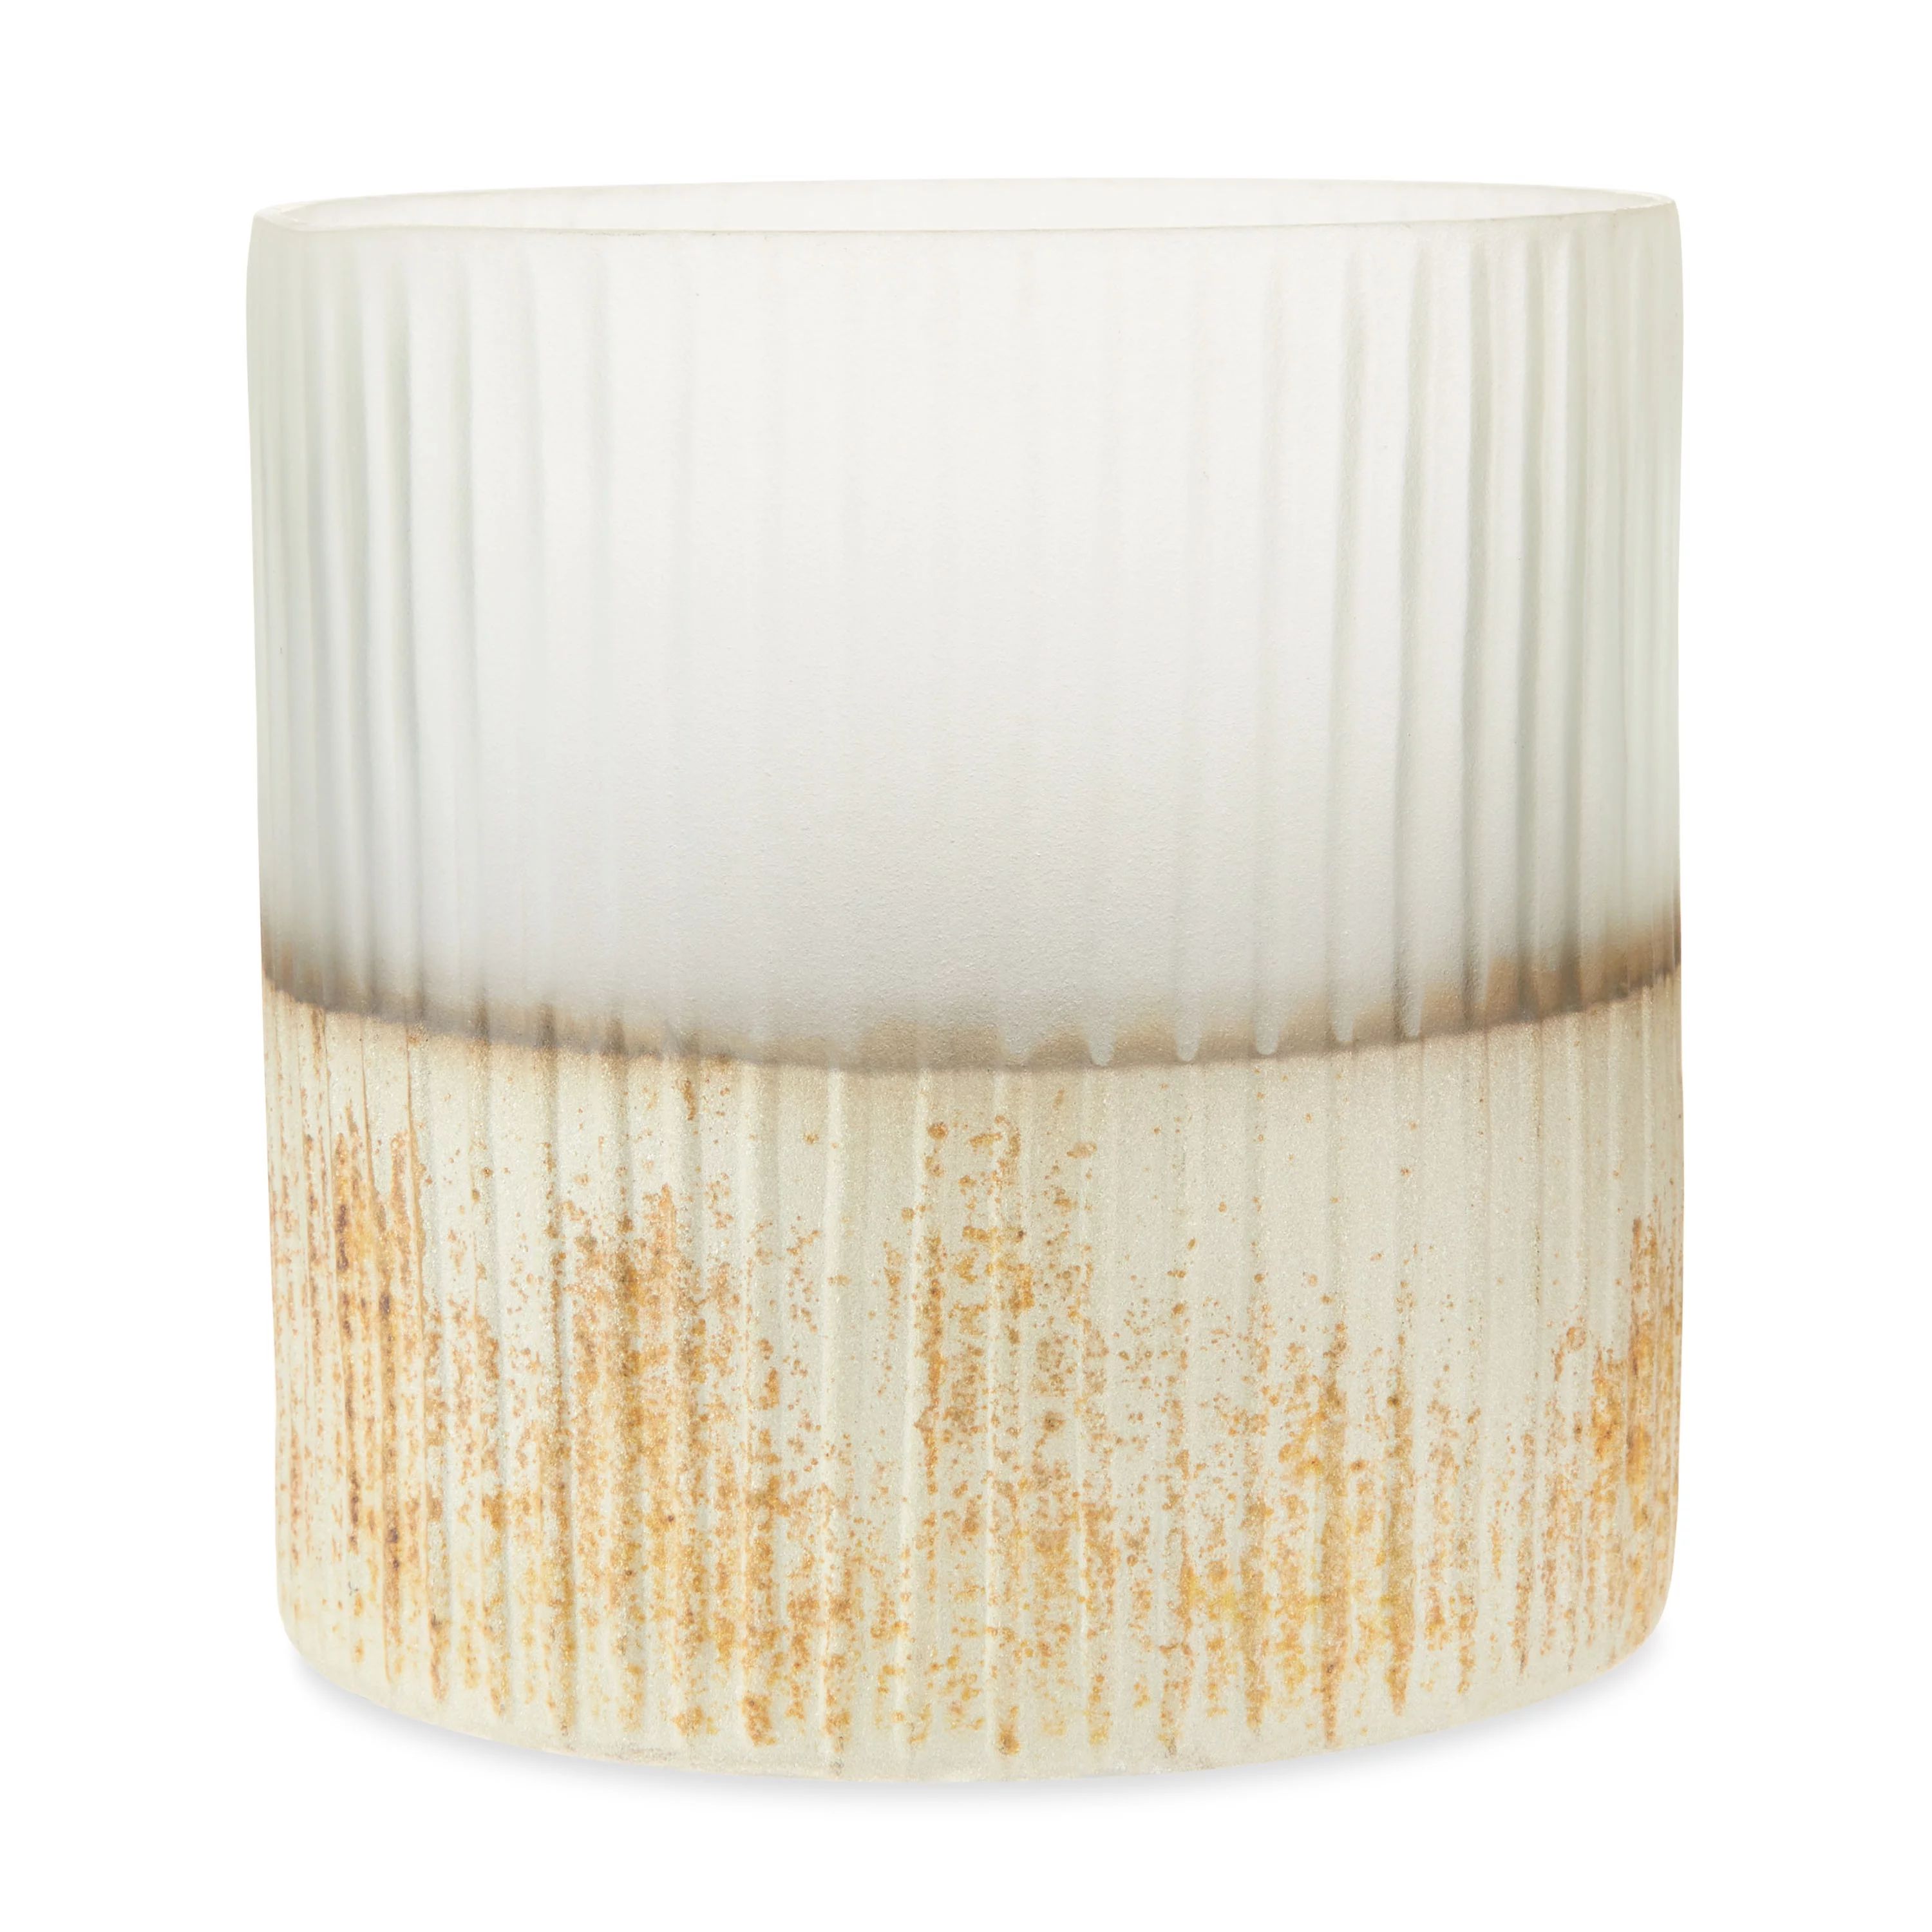 White & Gold Ombre Glass Votive Holder, 5", by Holiday Time | Walmart (US)